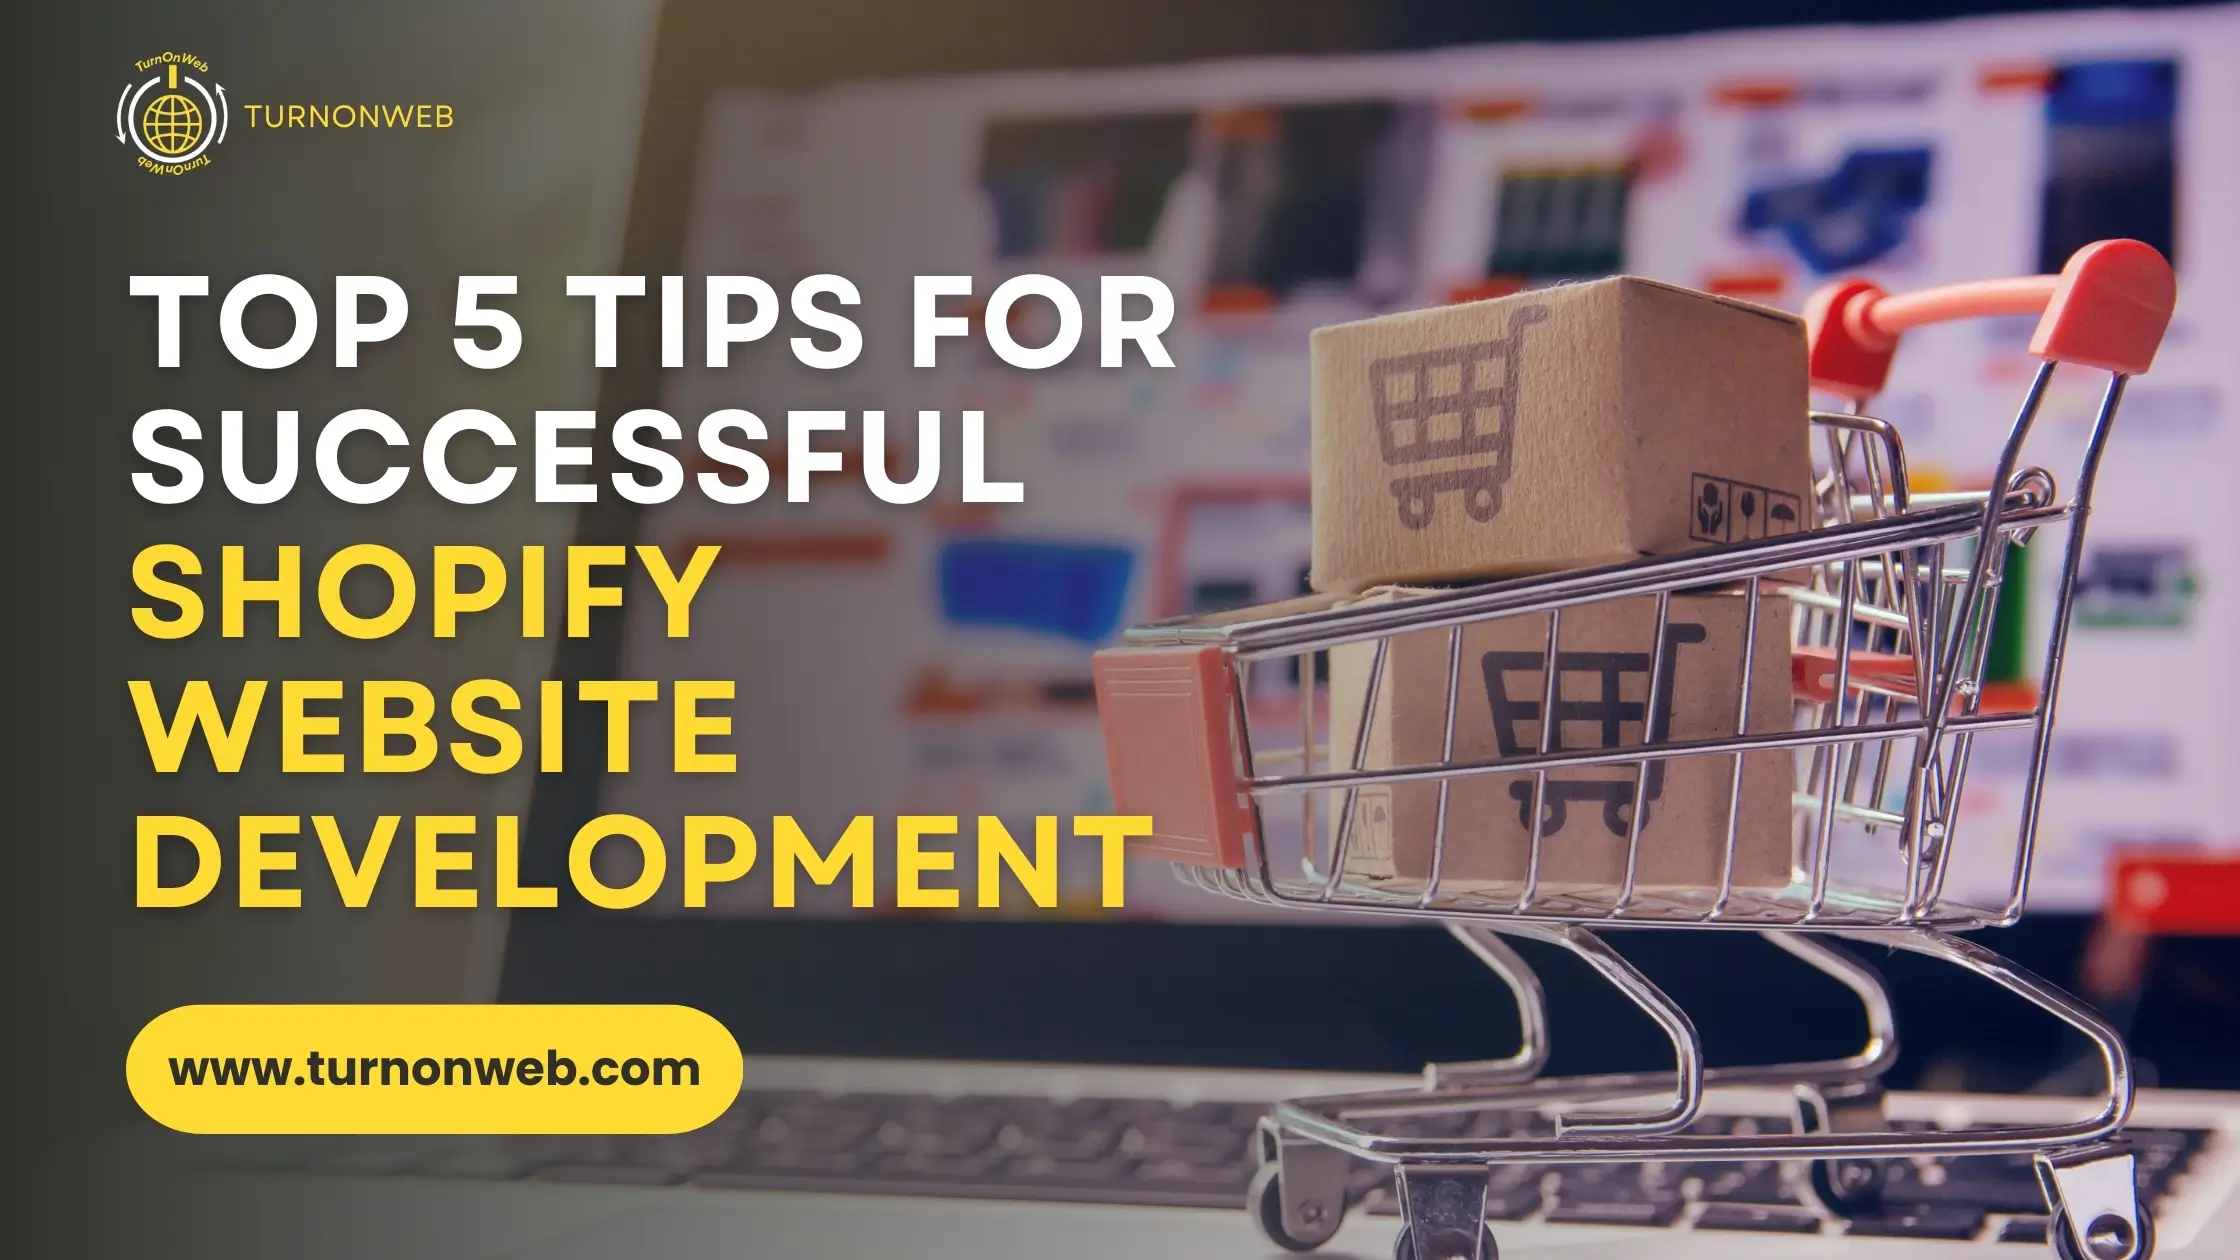 Top 5 Tips for Successful Shopify Website Development